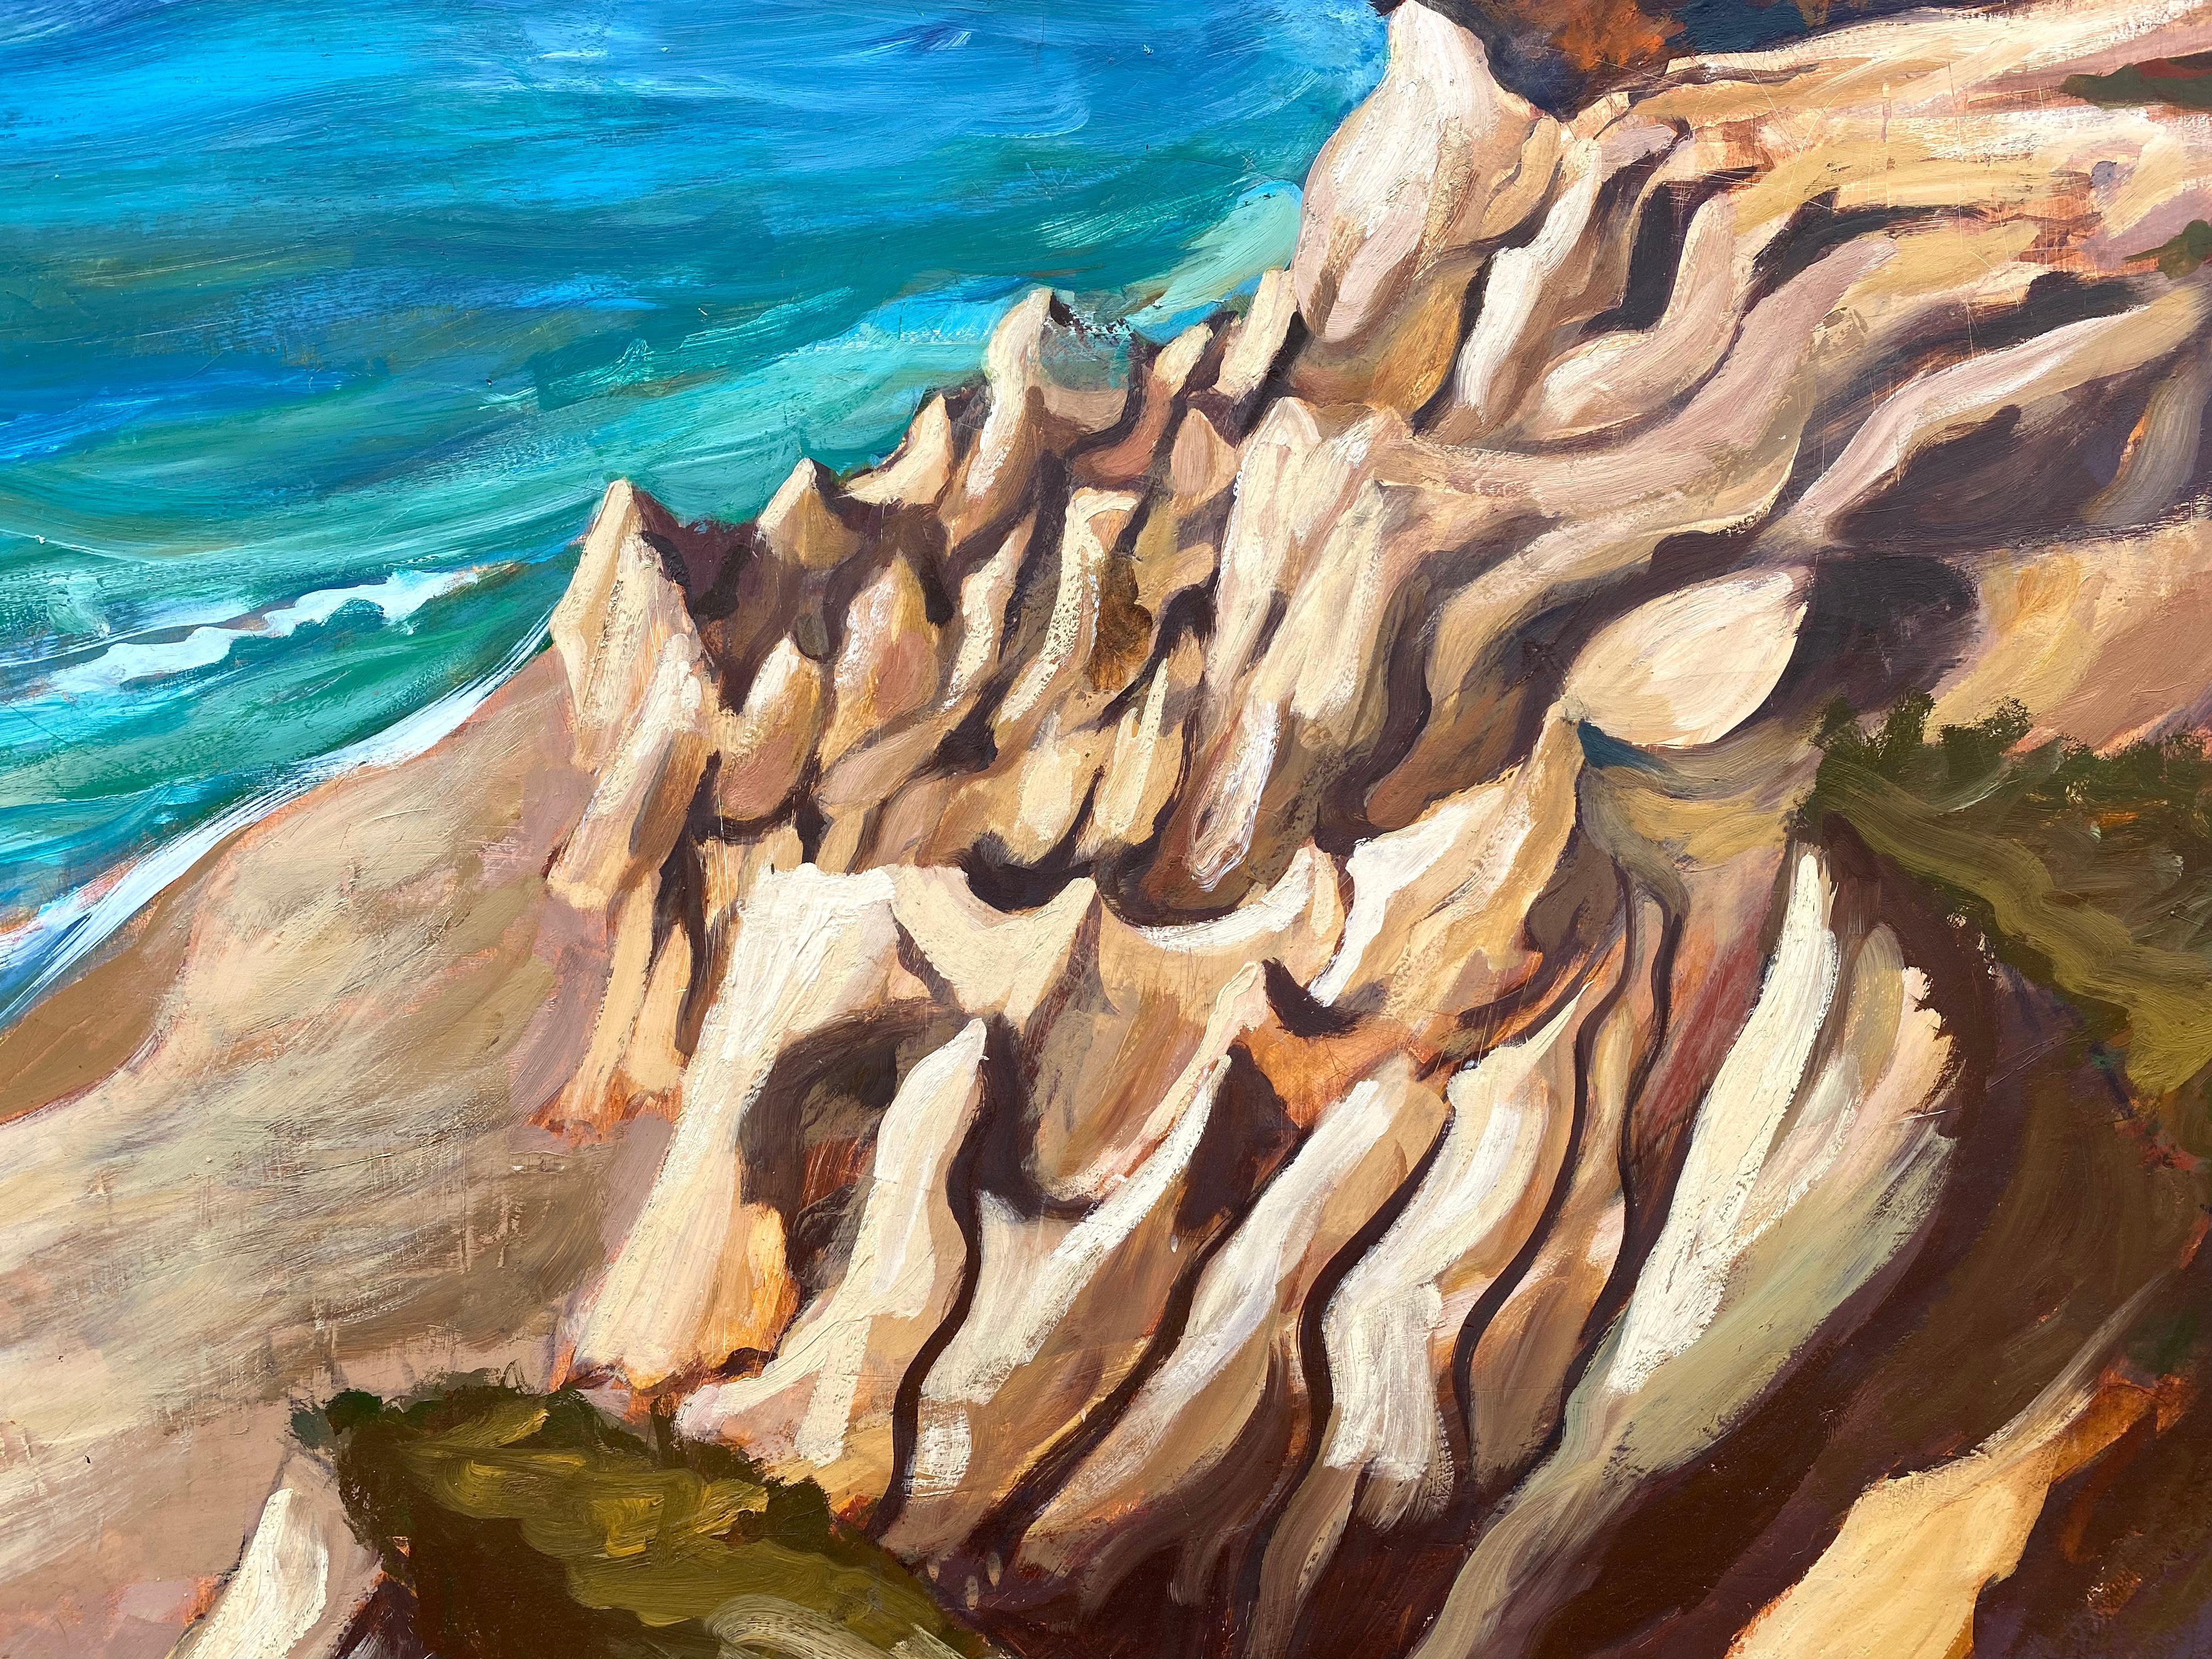 Original Iconic oil on canvas painting of the cliffs of Montauk, Long Island by Montauk artist, John Pomianowski. Signed lower left and dated 1999.  
The painting is housed in a custom yellow pine gallery shadow box frame in fine condition. The